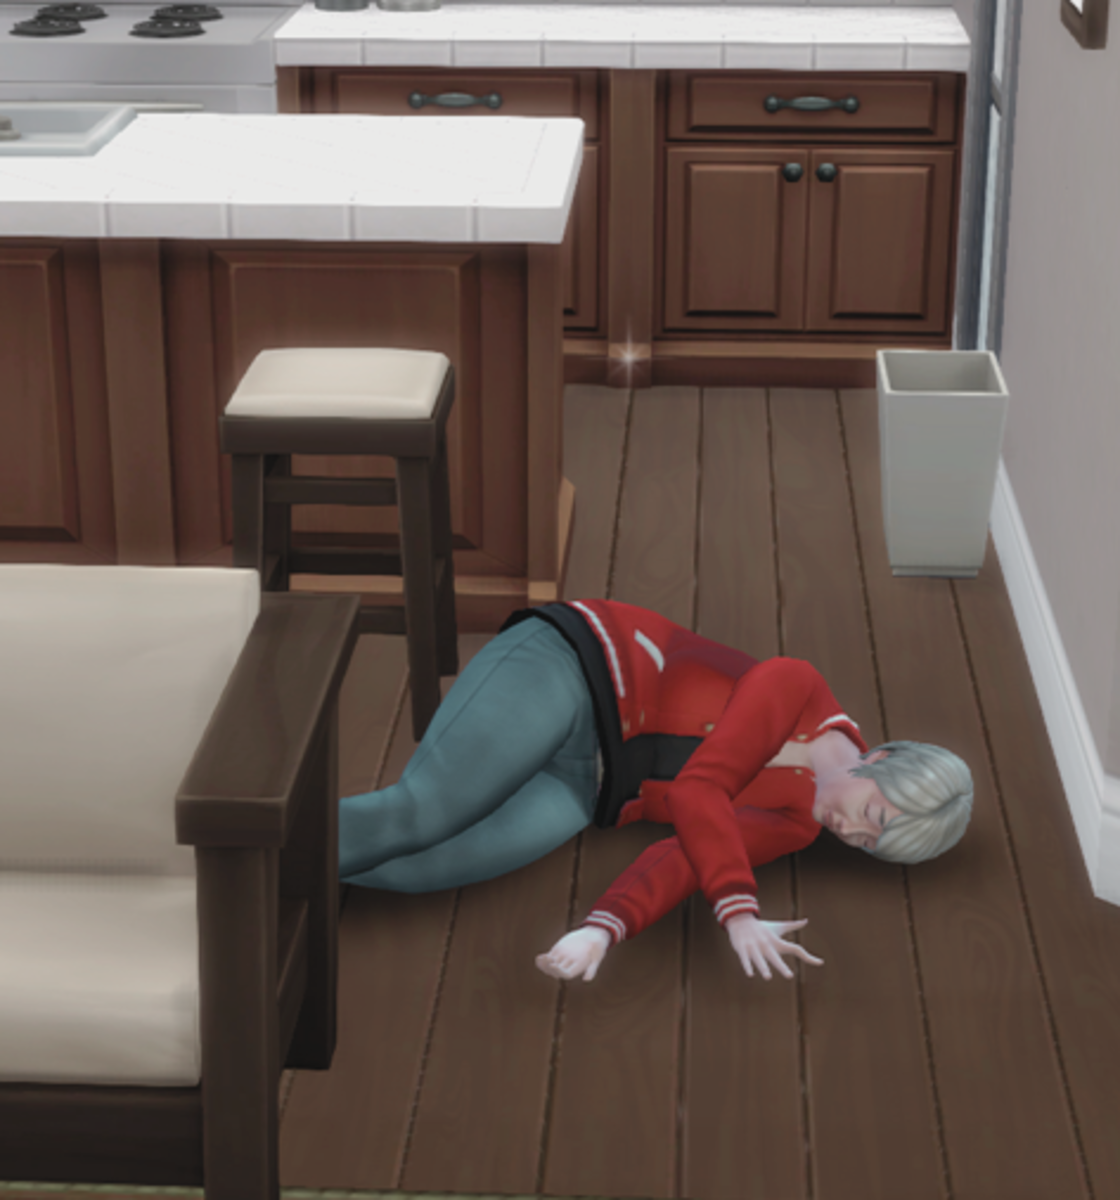 The Sims 4: Deaths